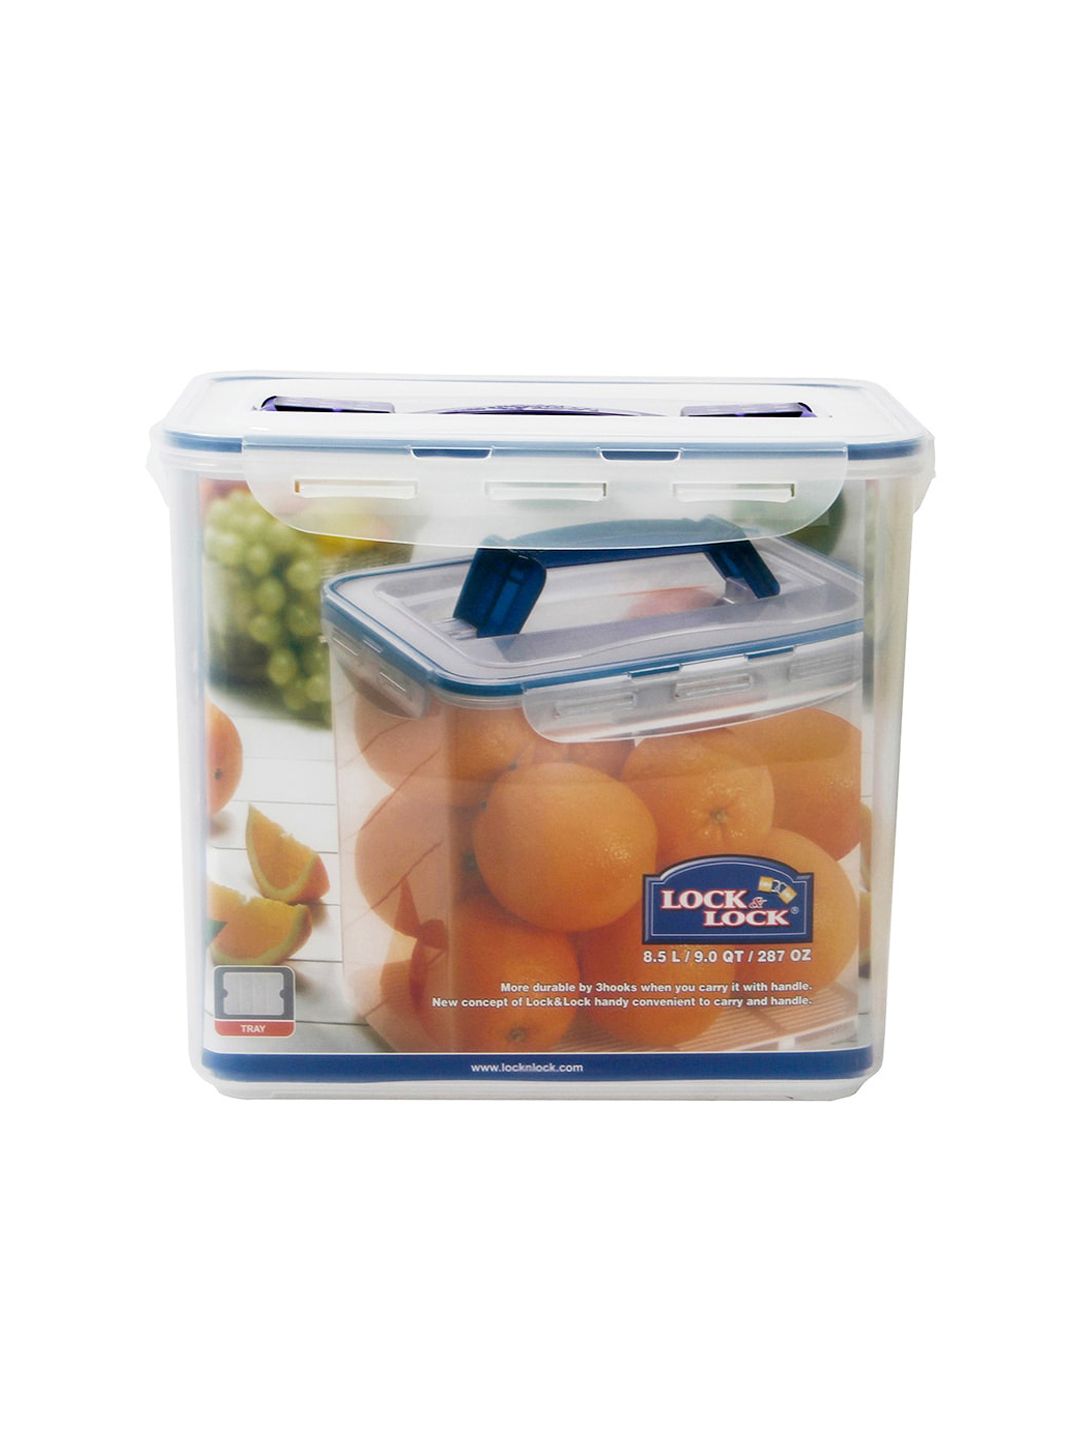 Lock & Lock Transparent Plastic Airtight Food Storage Container With Leakproof Lid 8.5 L Price in India